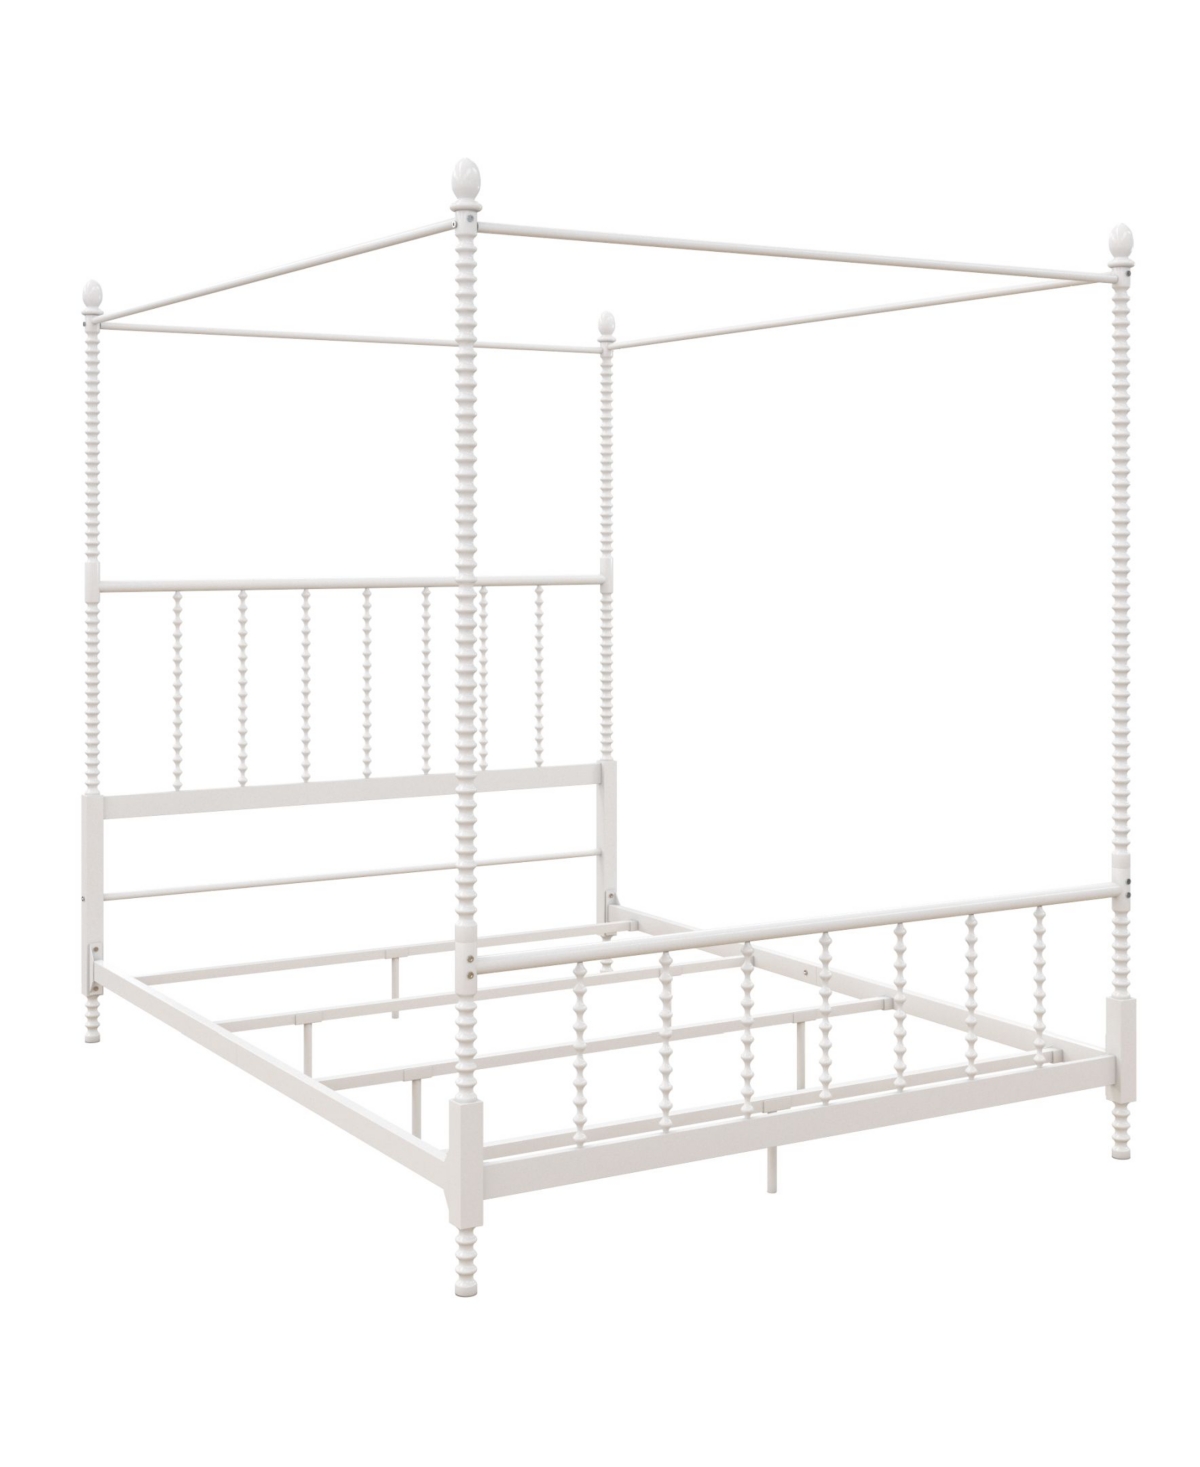 Atwater Living Krissy Canopy Bed, Full